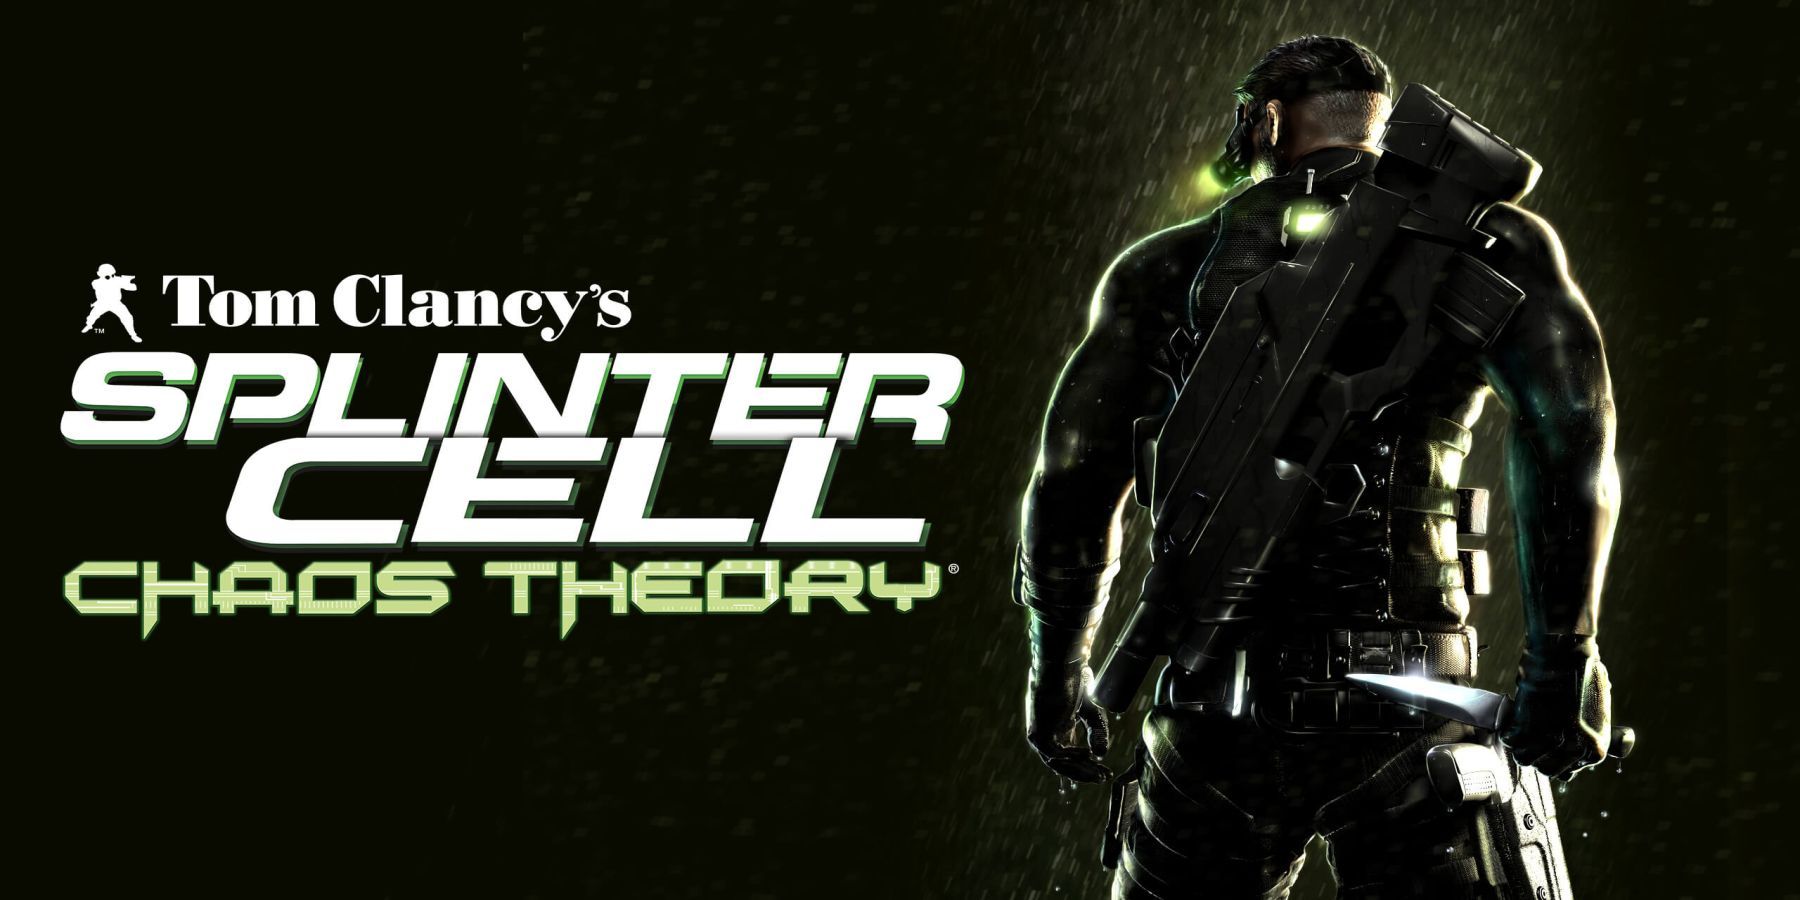 Splinter Cell Chaos Theory logo next to a geared up Sam Fisher